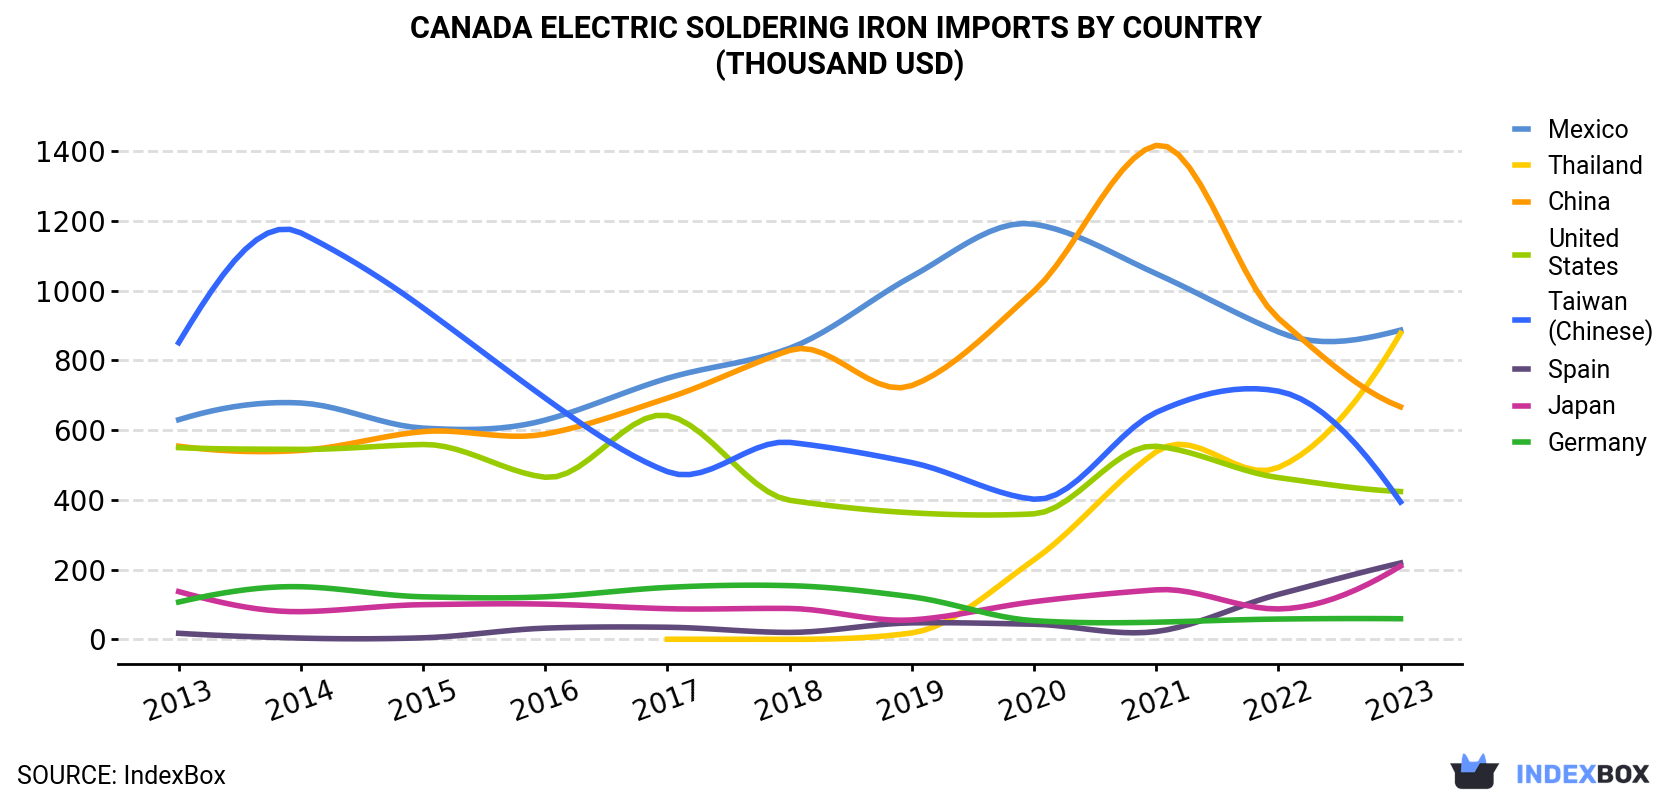 Canada Electric Soldering Iron Imports By Country (Thousand USD)